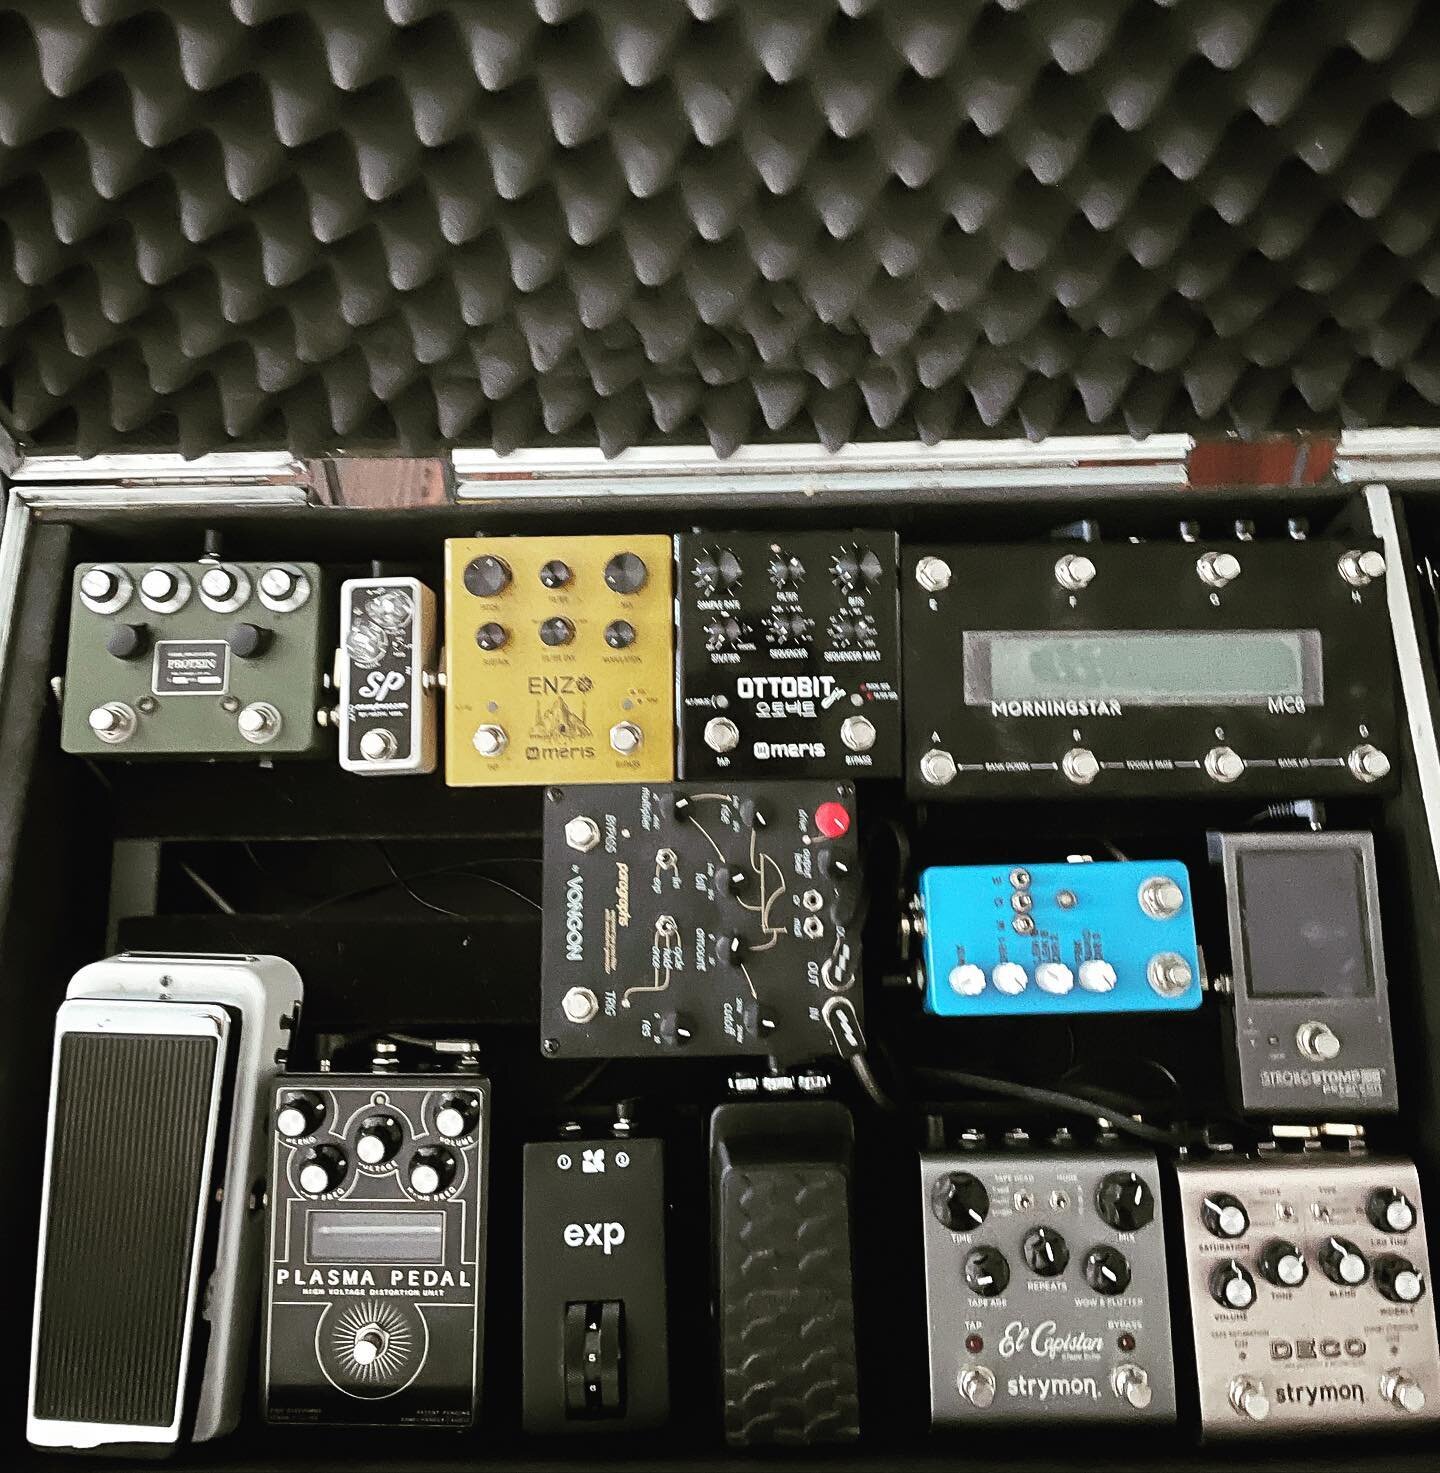 🪐Soundz💤 #pedalboard #pedals @meris.us @strymonengineering @gamechanger_audio @vongonelectronics @xotic_usa @mtl.asm @chasebliss @pedalboard_of_the_day